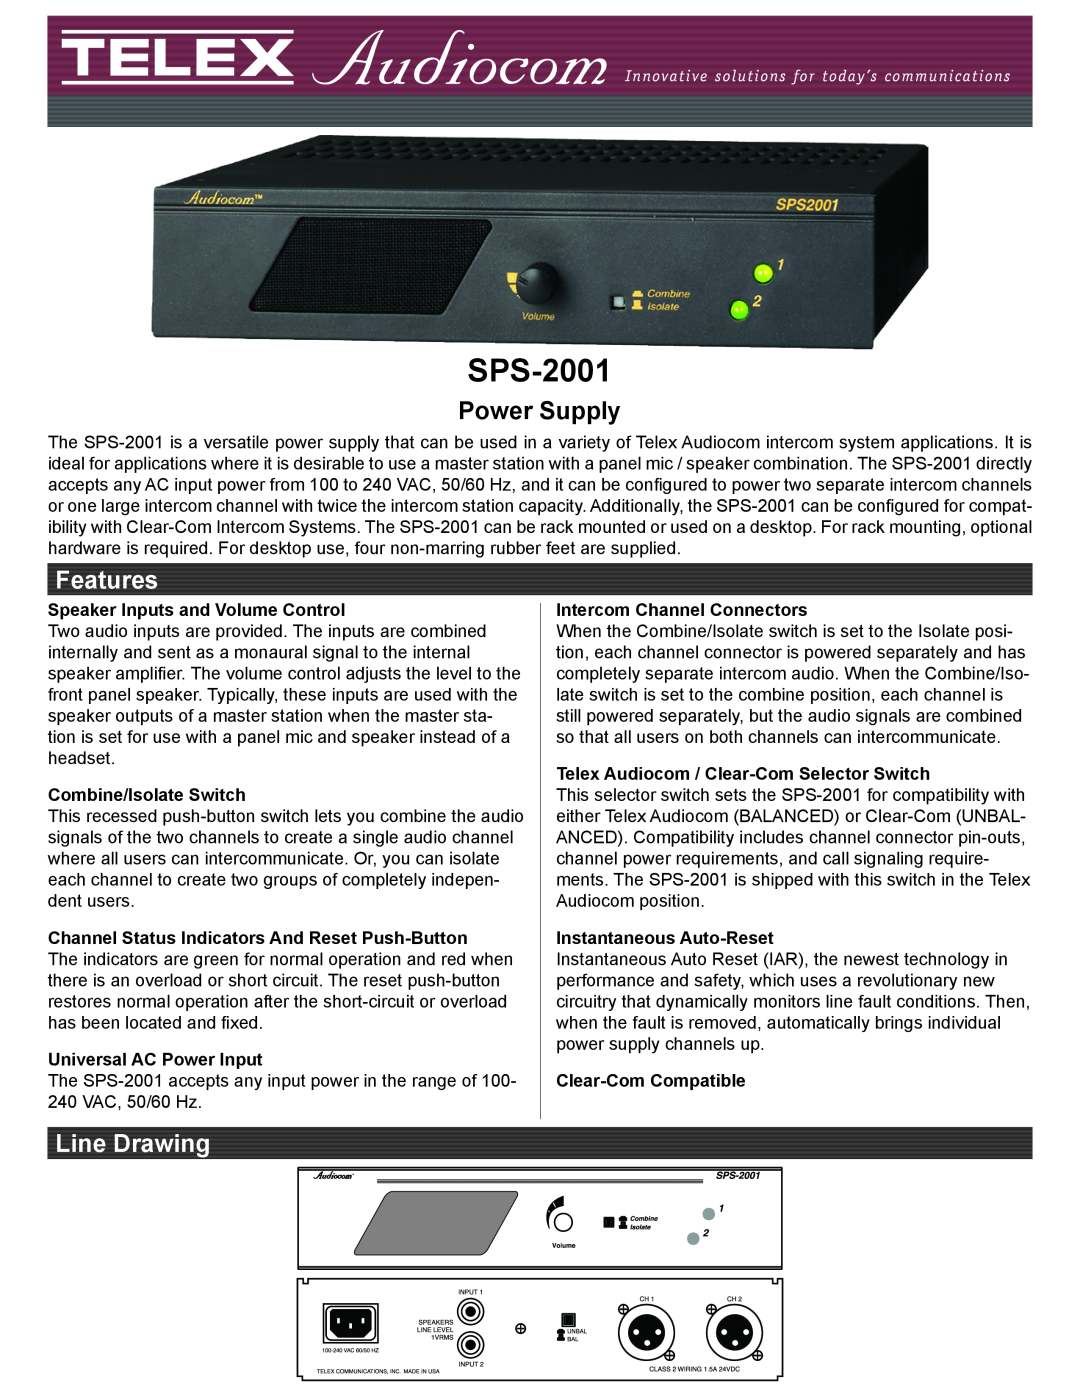 Telex SPS-2001 manual Speaker Inputs and Volume Control, Combine/Isolate Switch, Universal AC Power Input, Power Supply 